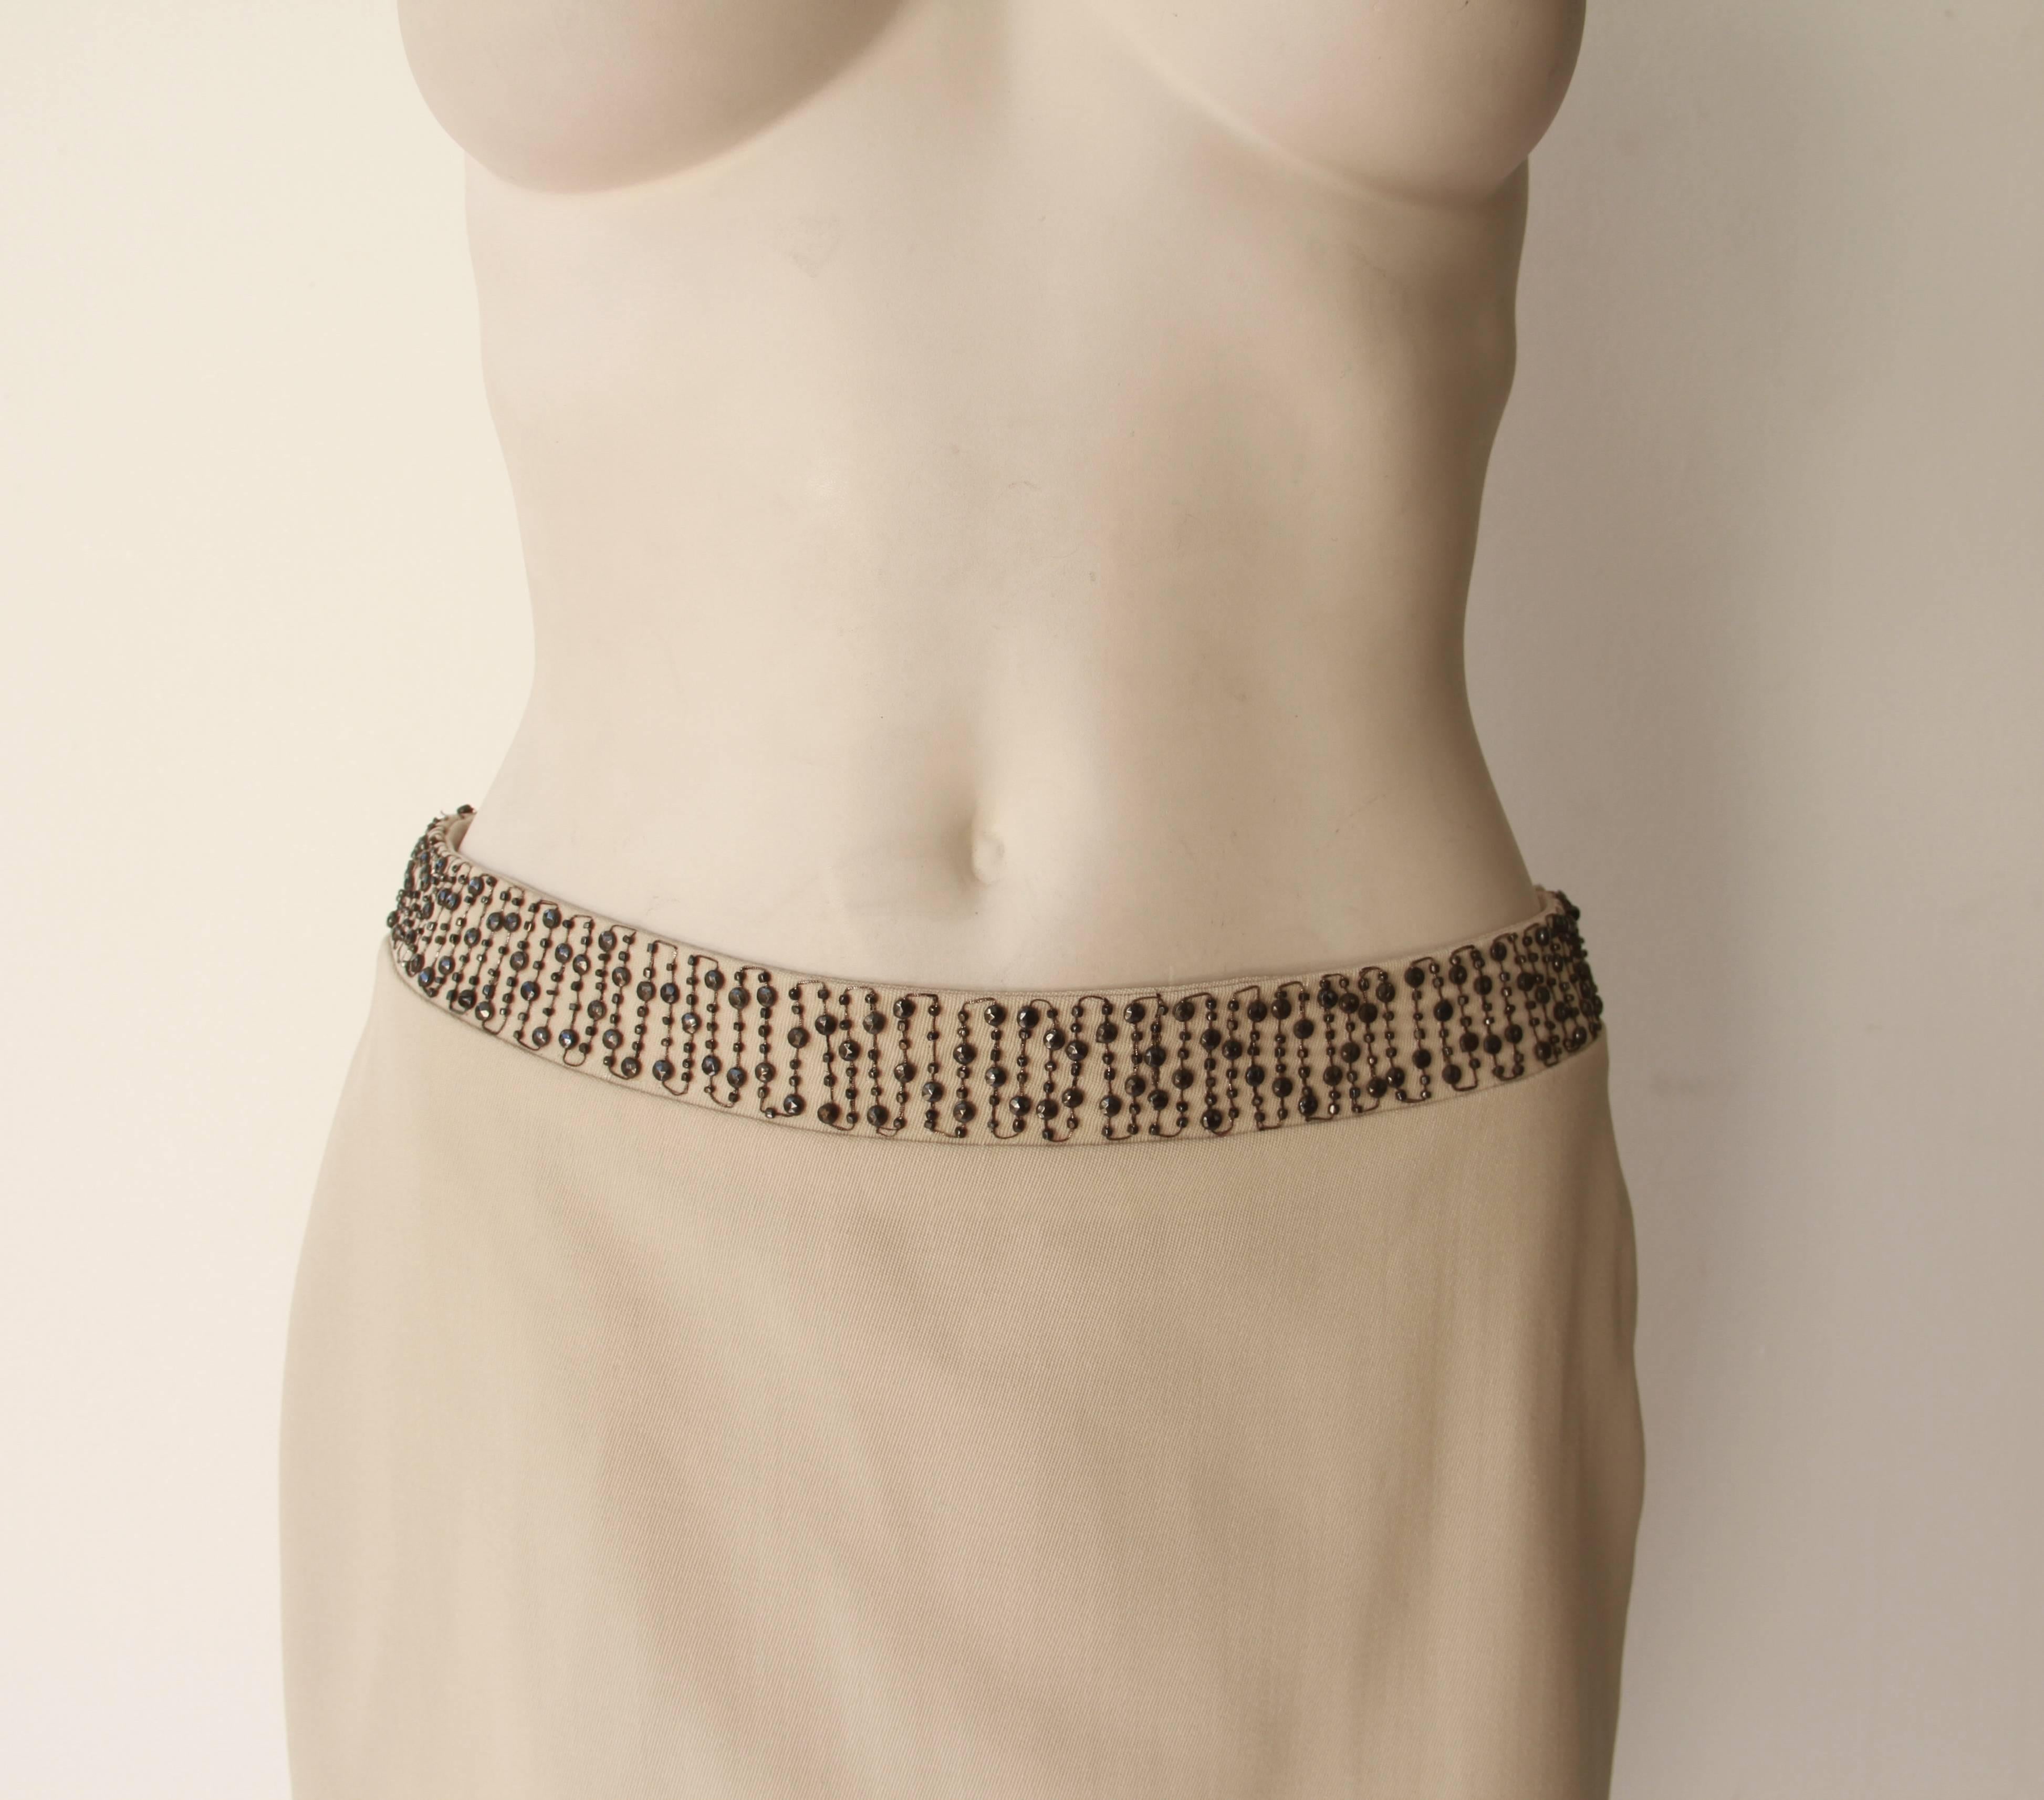 Gianni Versace micro mini skirt, featuring a beaded waistband from the Spring 1998 collection.

Marked an Italian size 42. However, please note that the skirt runs small and the fit is closer to an Italian size 40.

Manufacturer - Alias